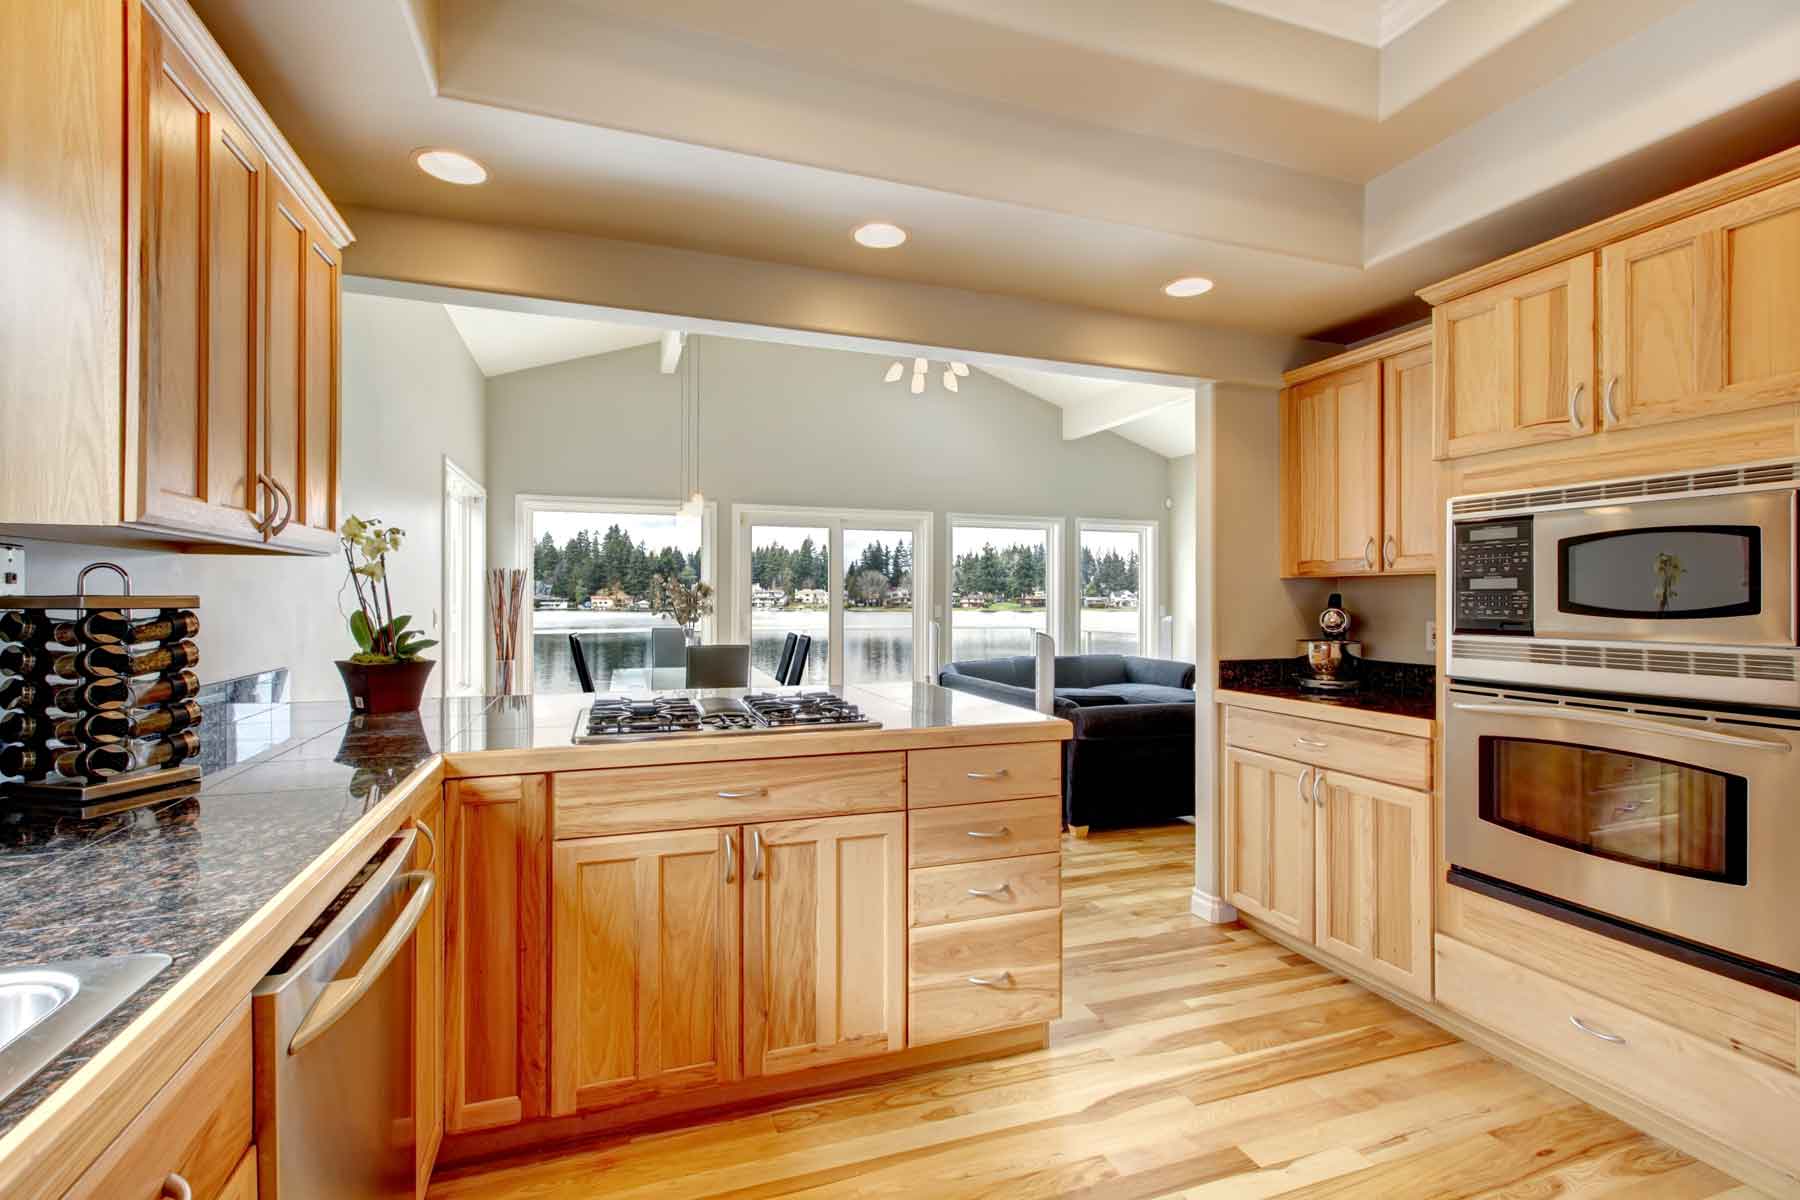 Refinishing Kitchen Cabinets Cost